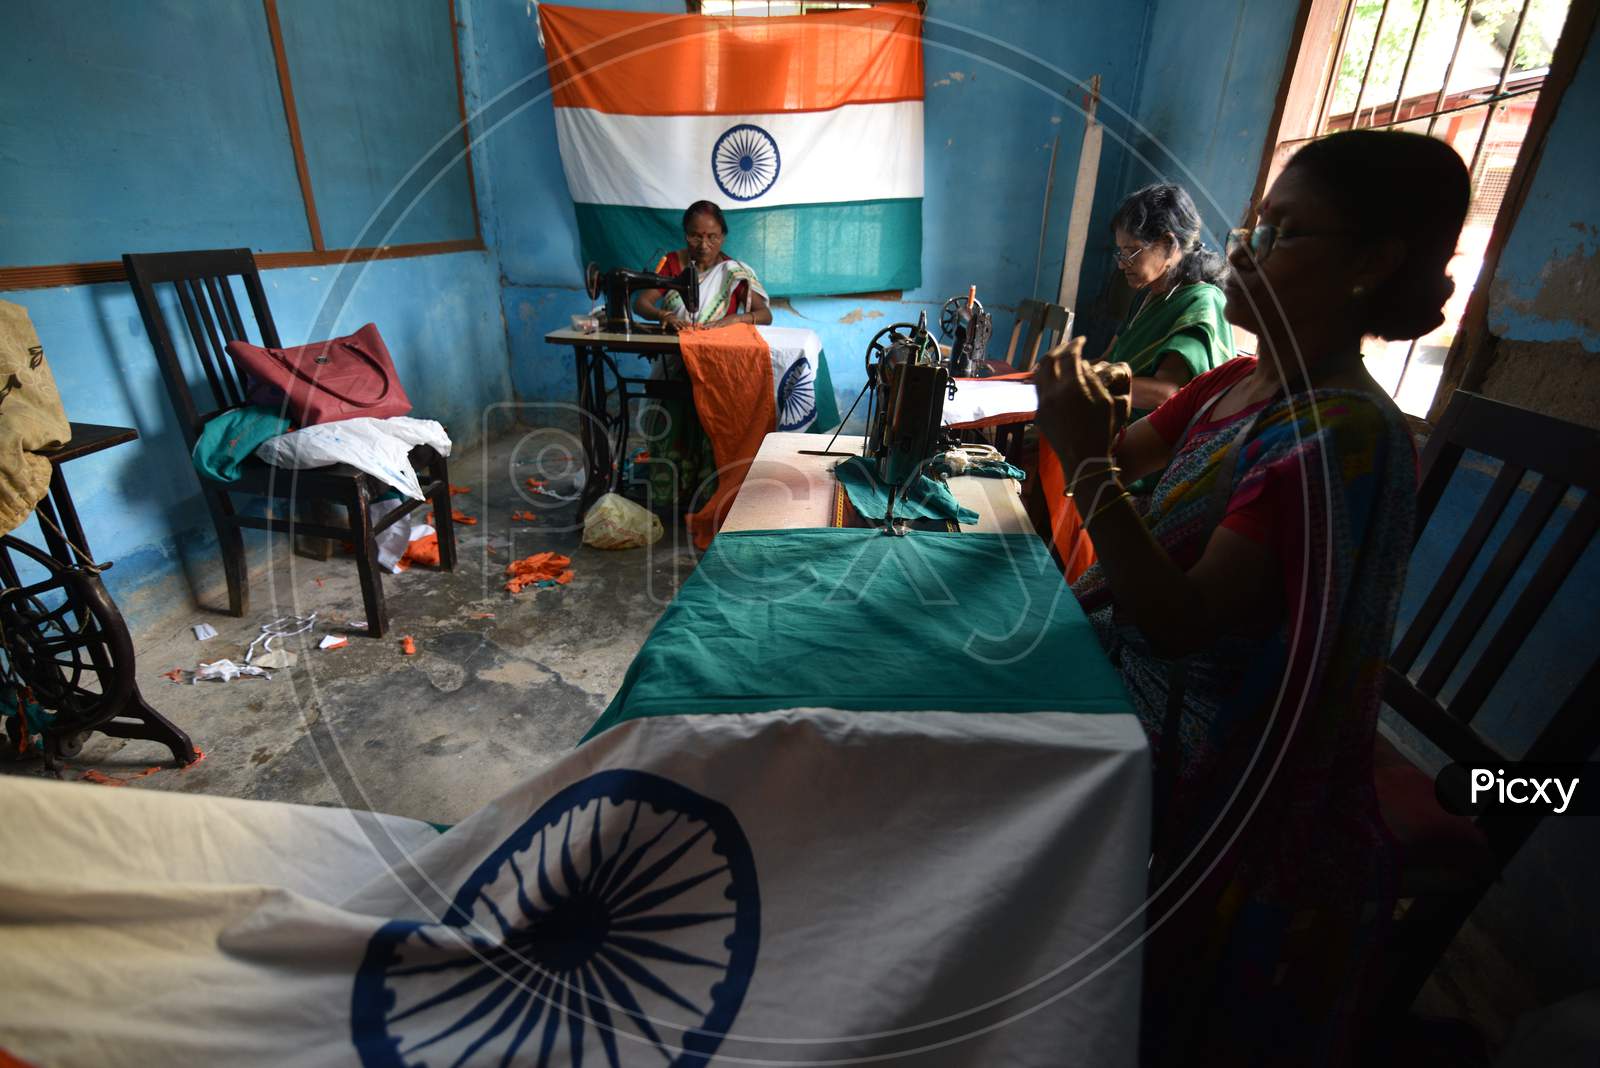 Indian National Tri-Colour Flag  Making By Woman in Workshops In Guwahati, Assam